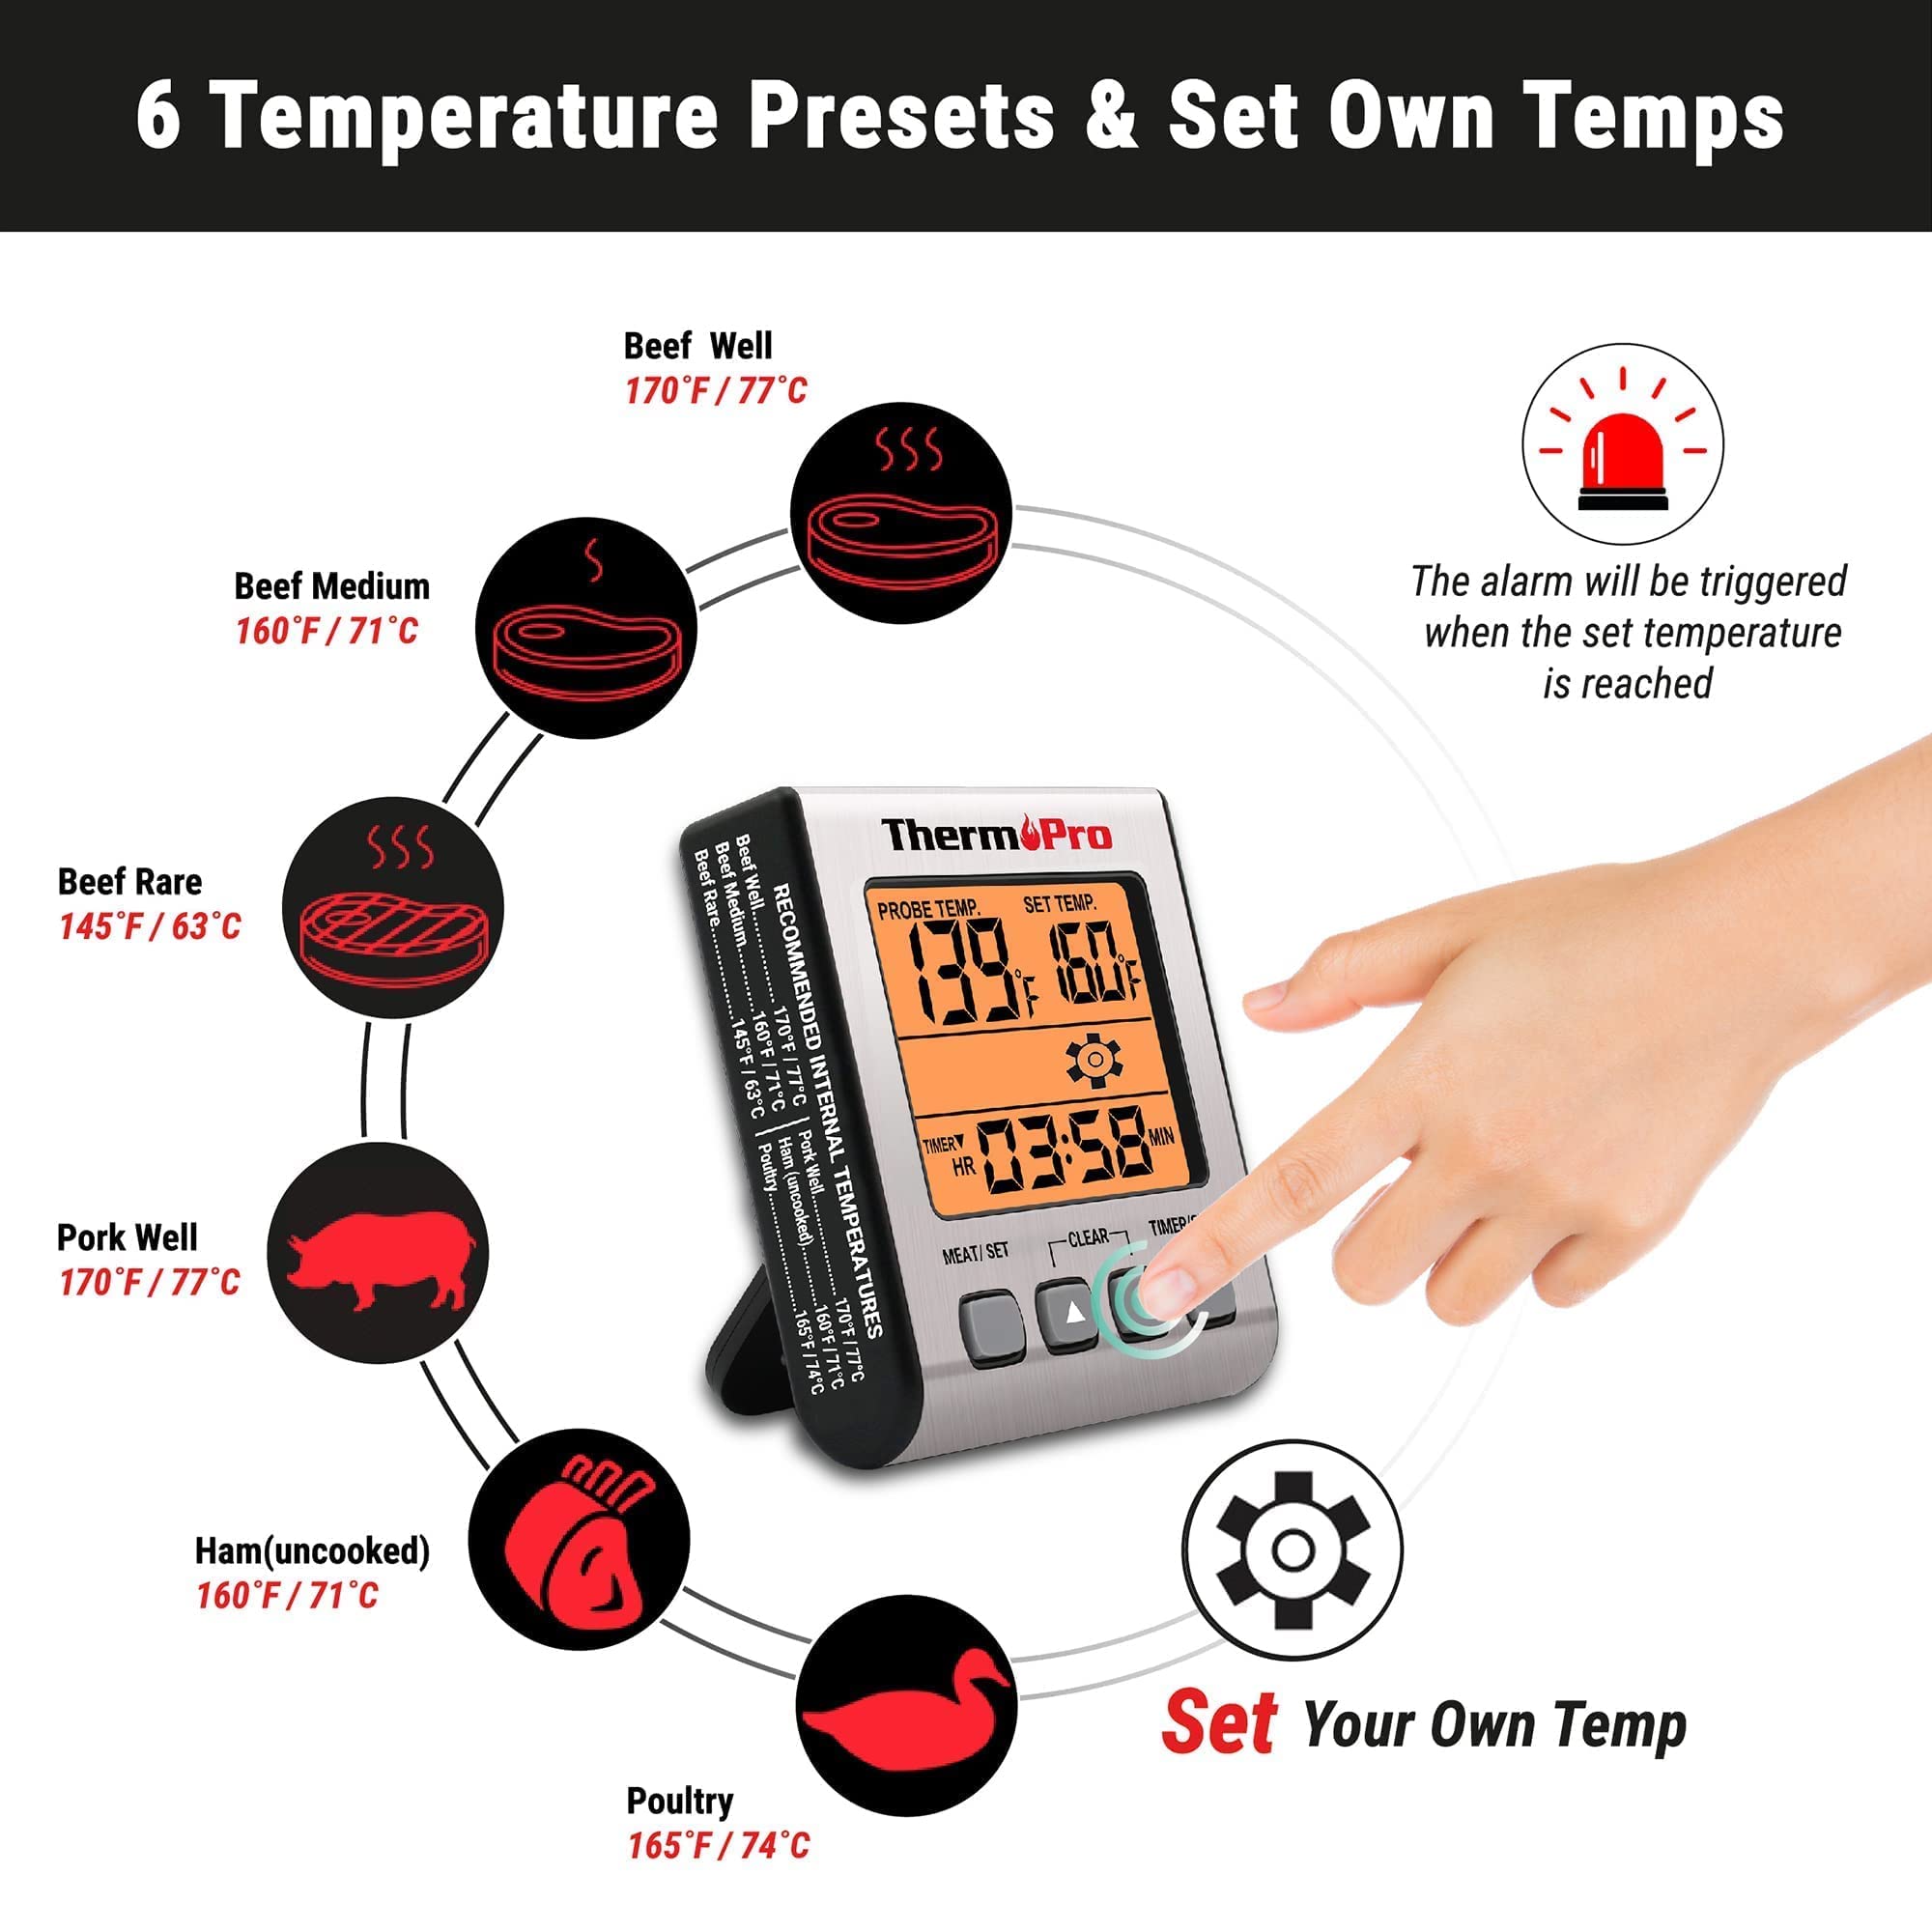 ThermoPro TP16S Digital Meat Thermometer for Cooking and Grilling +ThermoPro TP610 Dual Probe Instant Read Meat Thermometer